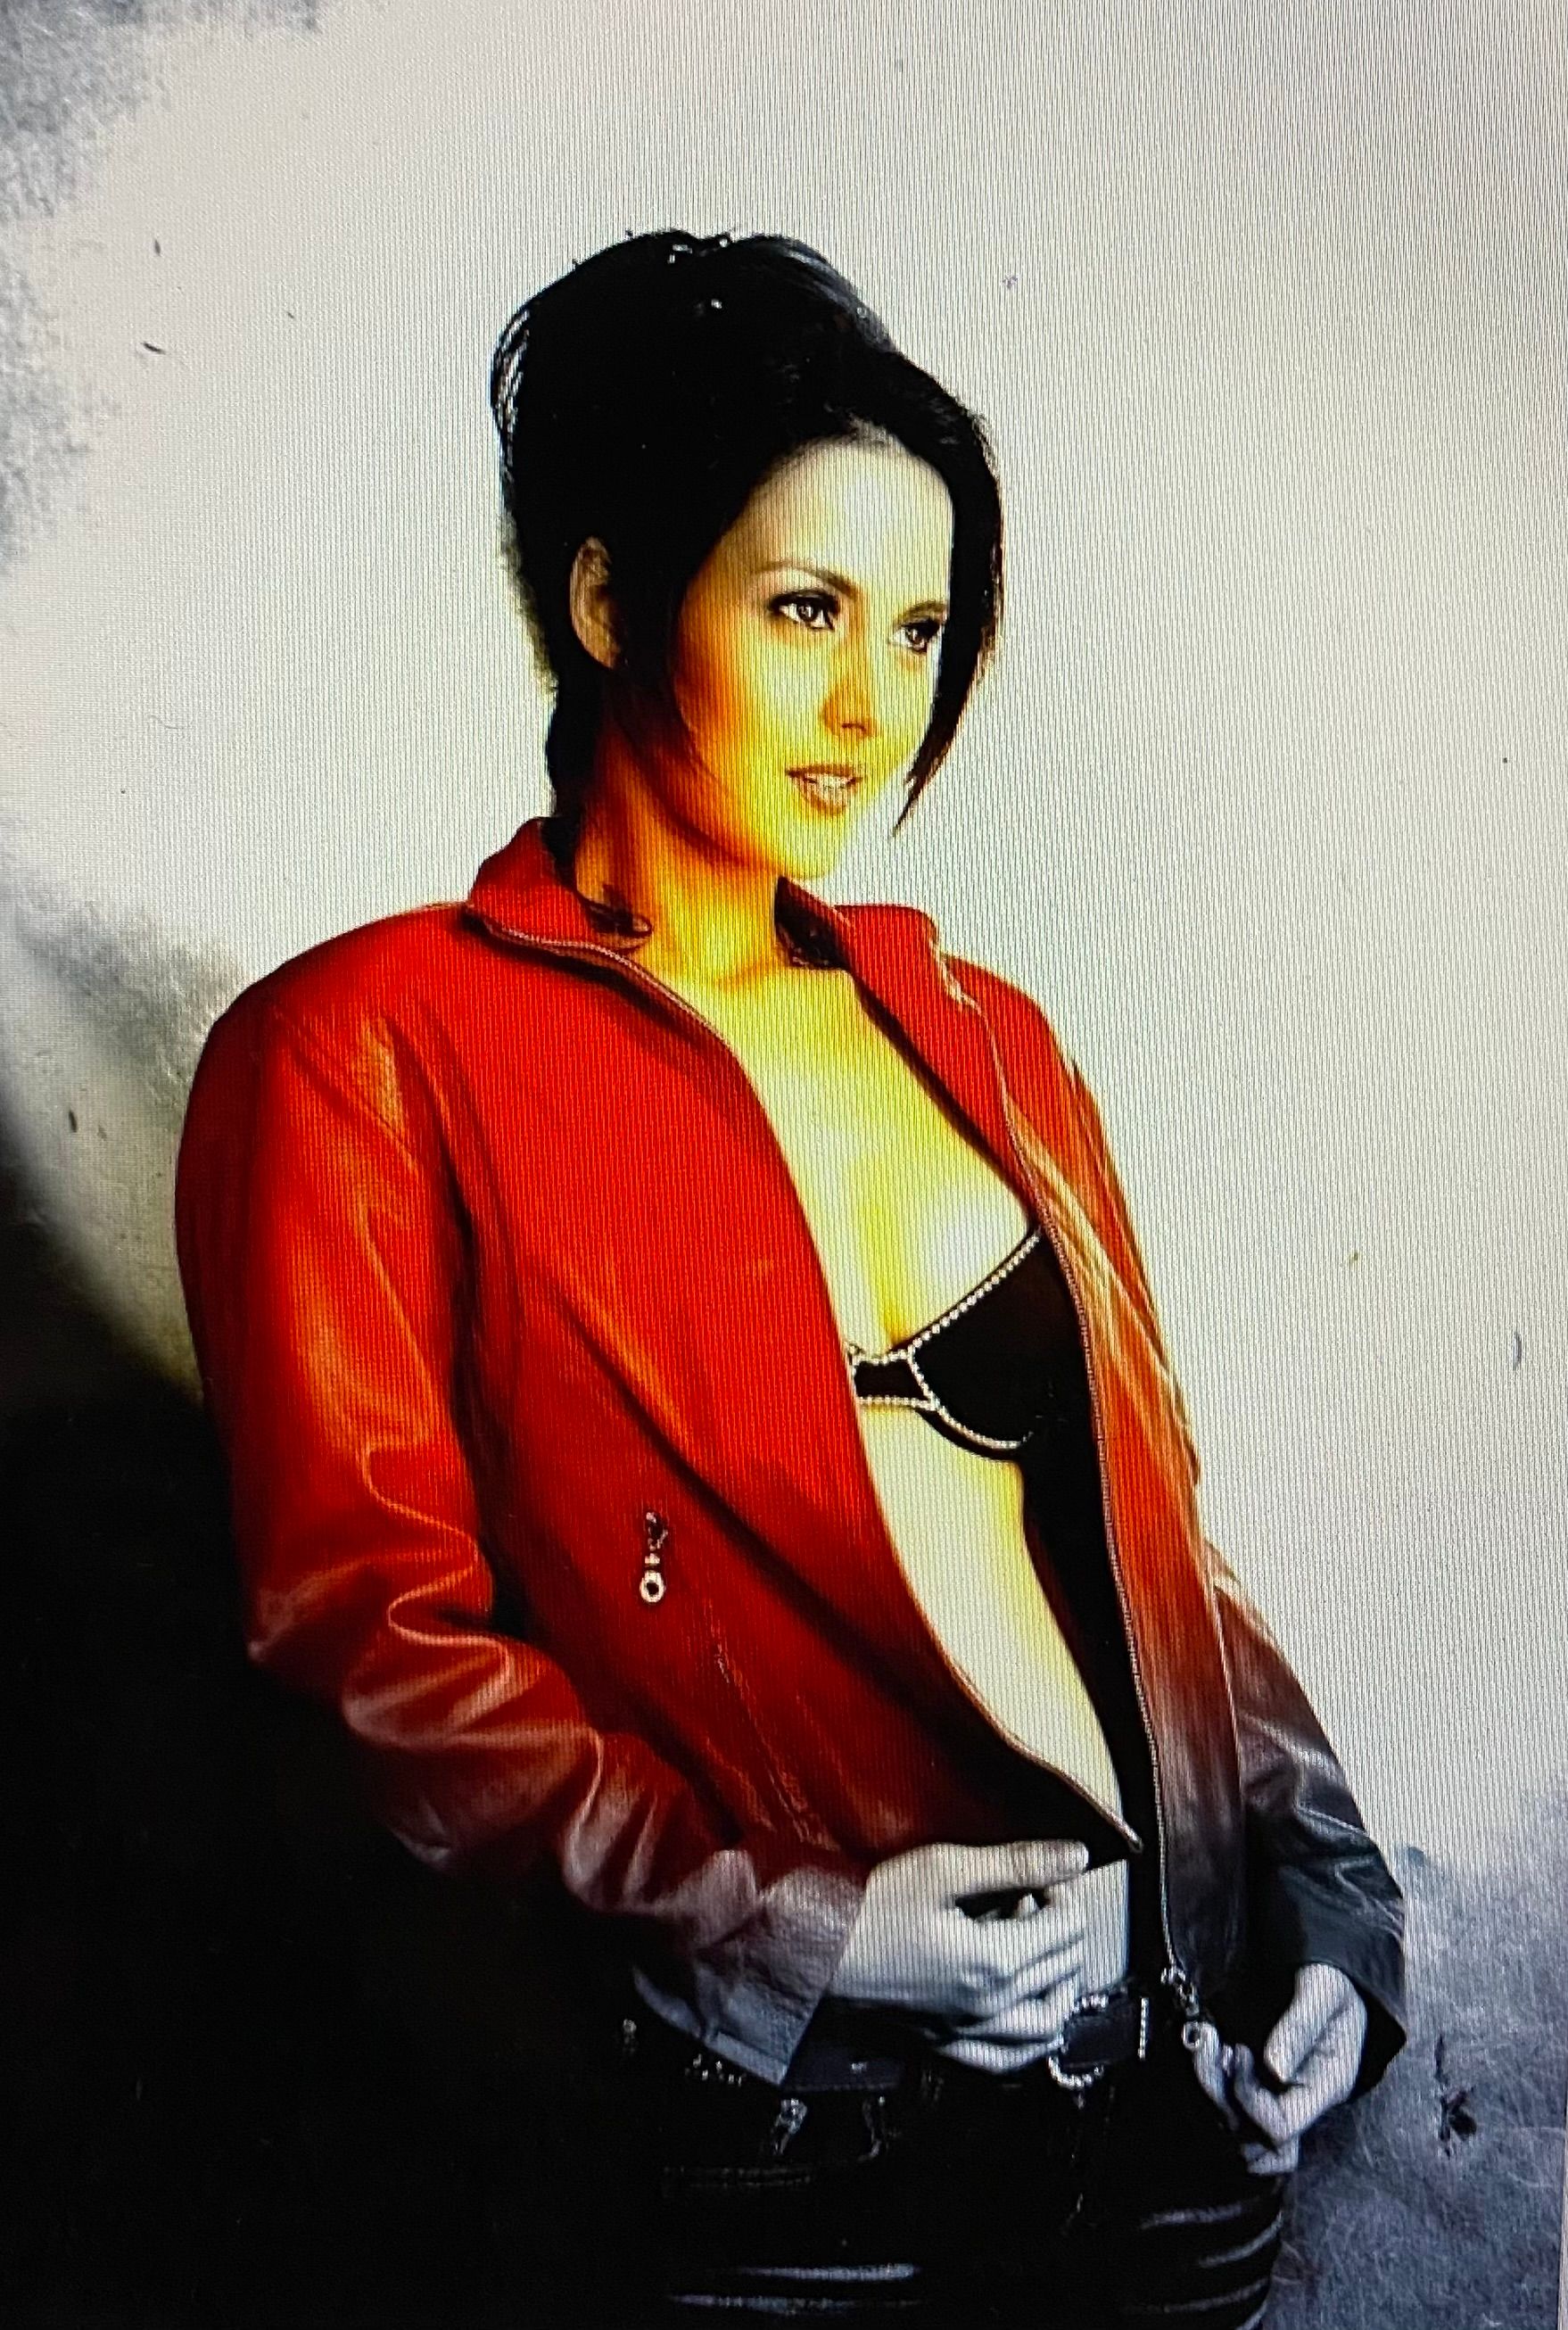 Tulip Joshi in a Red Jacket